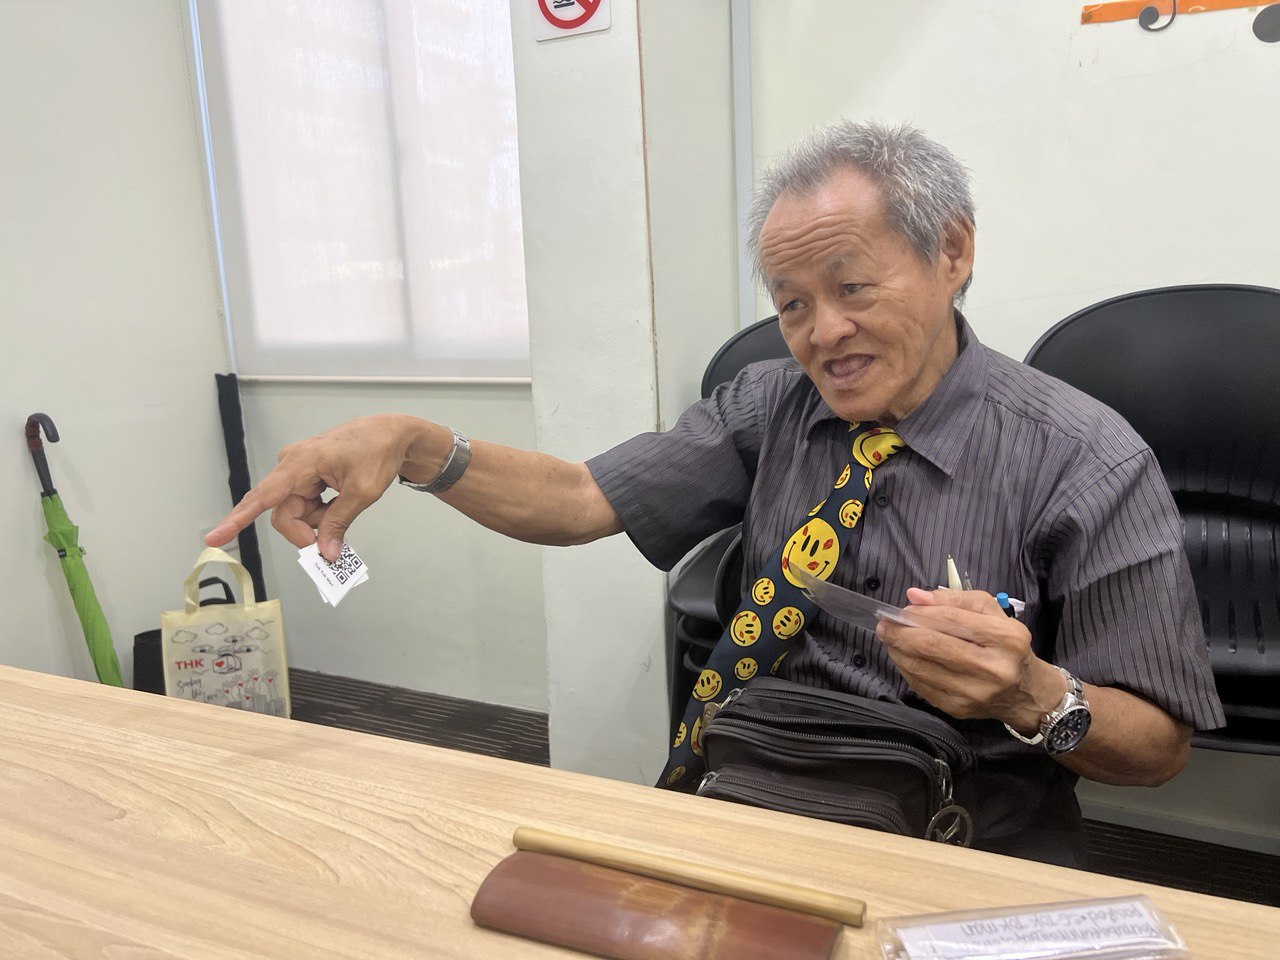 Lai sits on a chair in front of a desk, holding some slips of paper in his hand. He is dressed in a grey collared shirt, along with a dark blue tie that has yellow smiley faces and red cartoon lipstick stains over it. He also has one wristwatch on each hand.